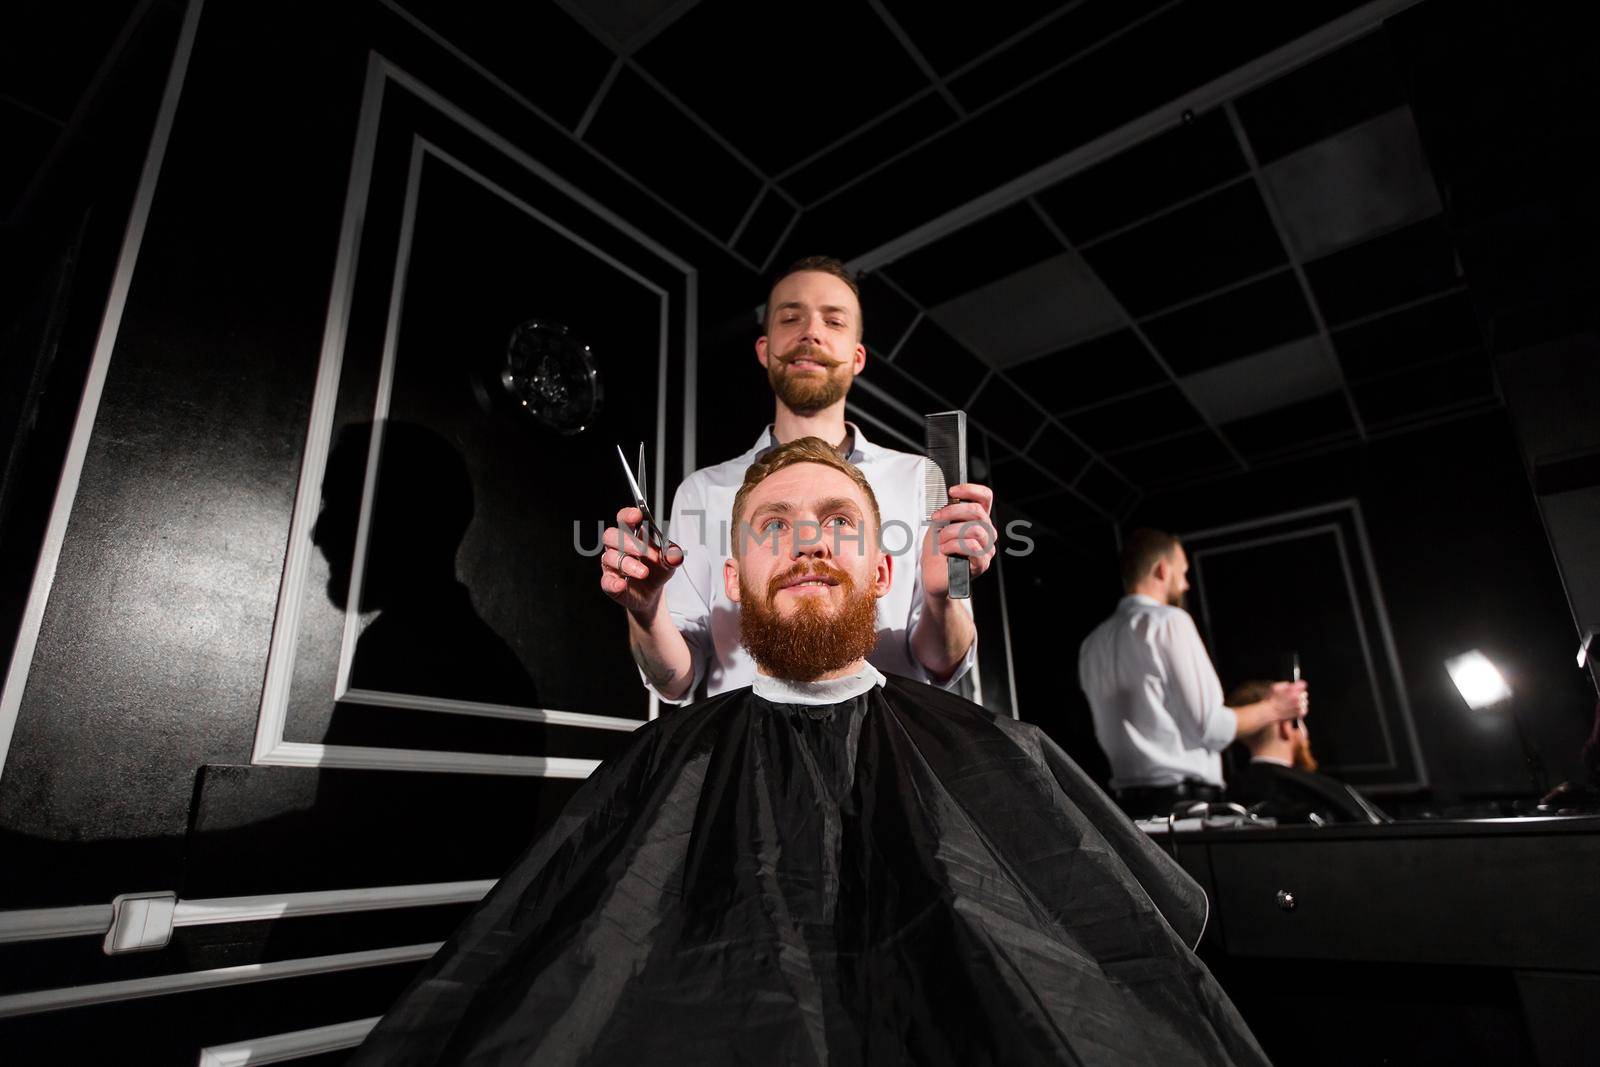 Master cuts hair and beard in the Barber shop. Hairdresser makes hairstyle using scissors and a metal comb. by StudioPeace